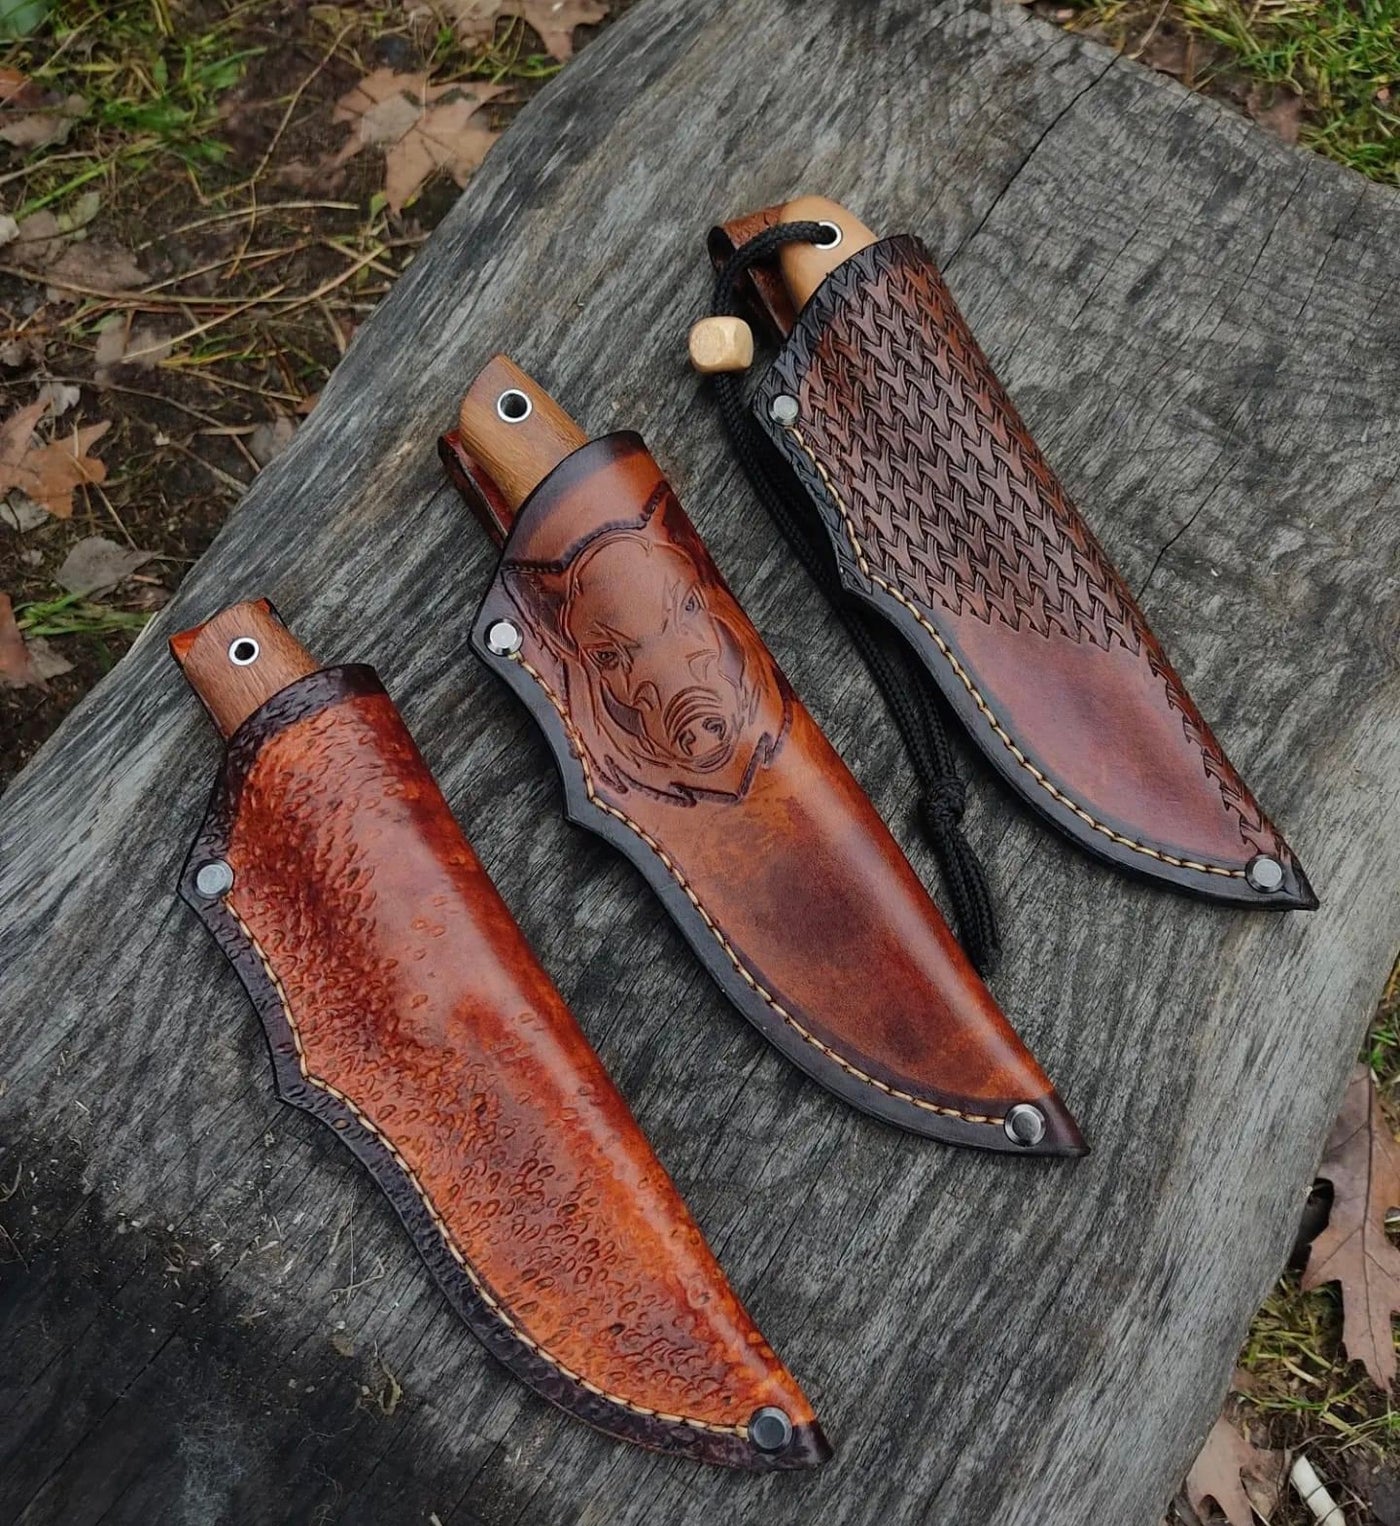 3 Pieces Hunting Knife Set With Leather Sheath DK-221